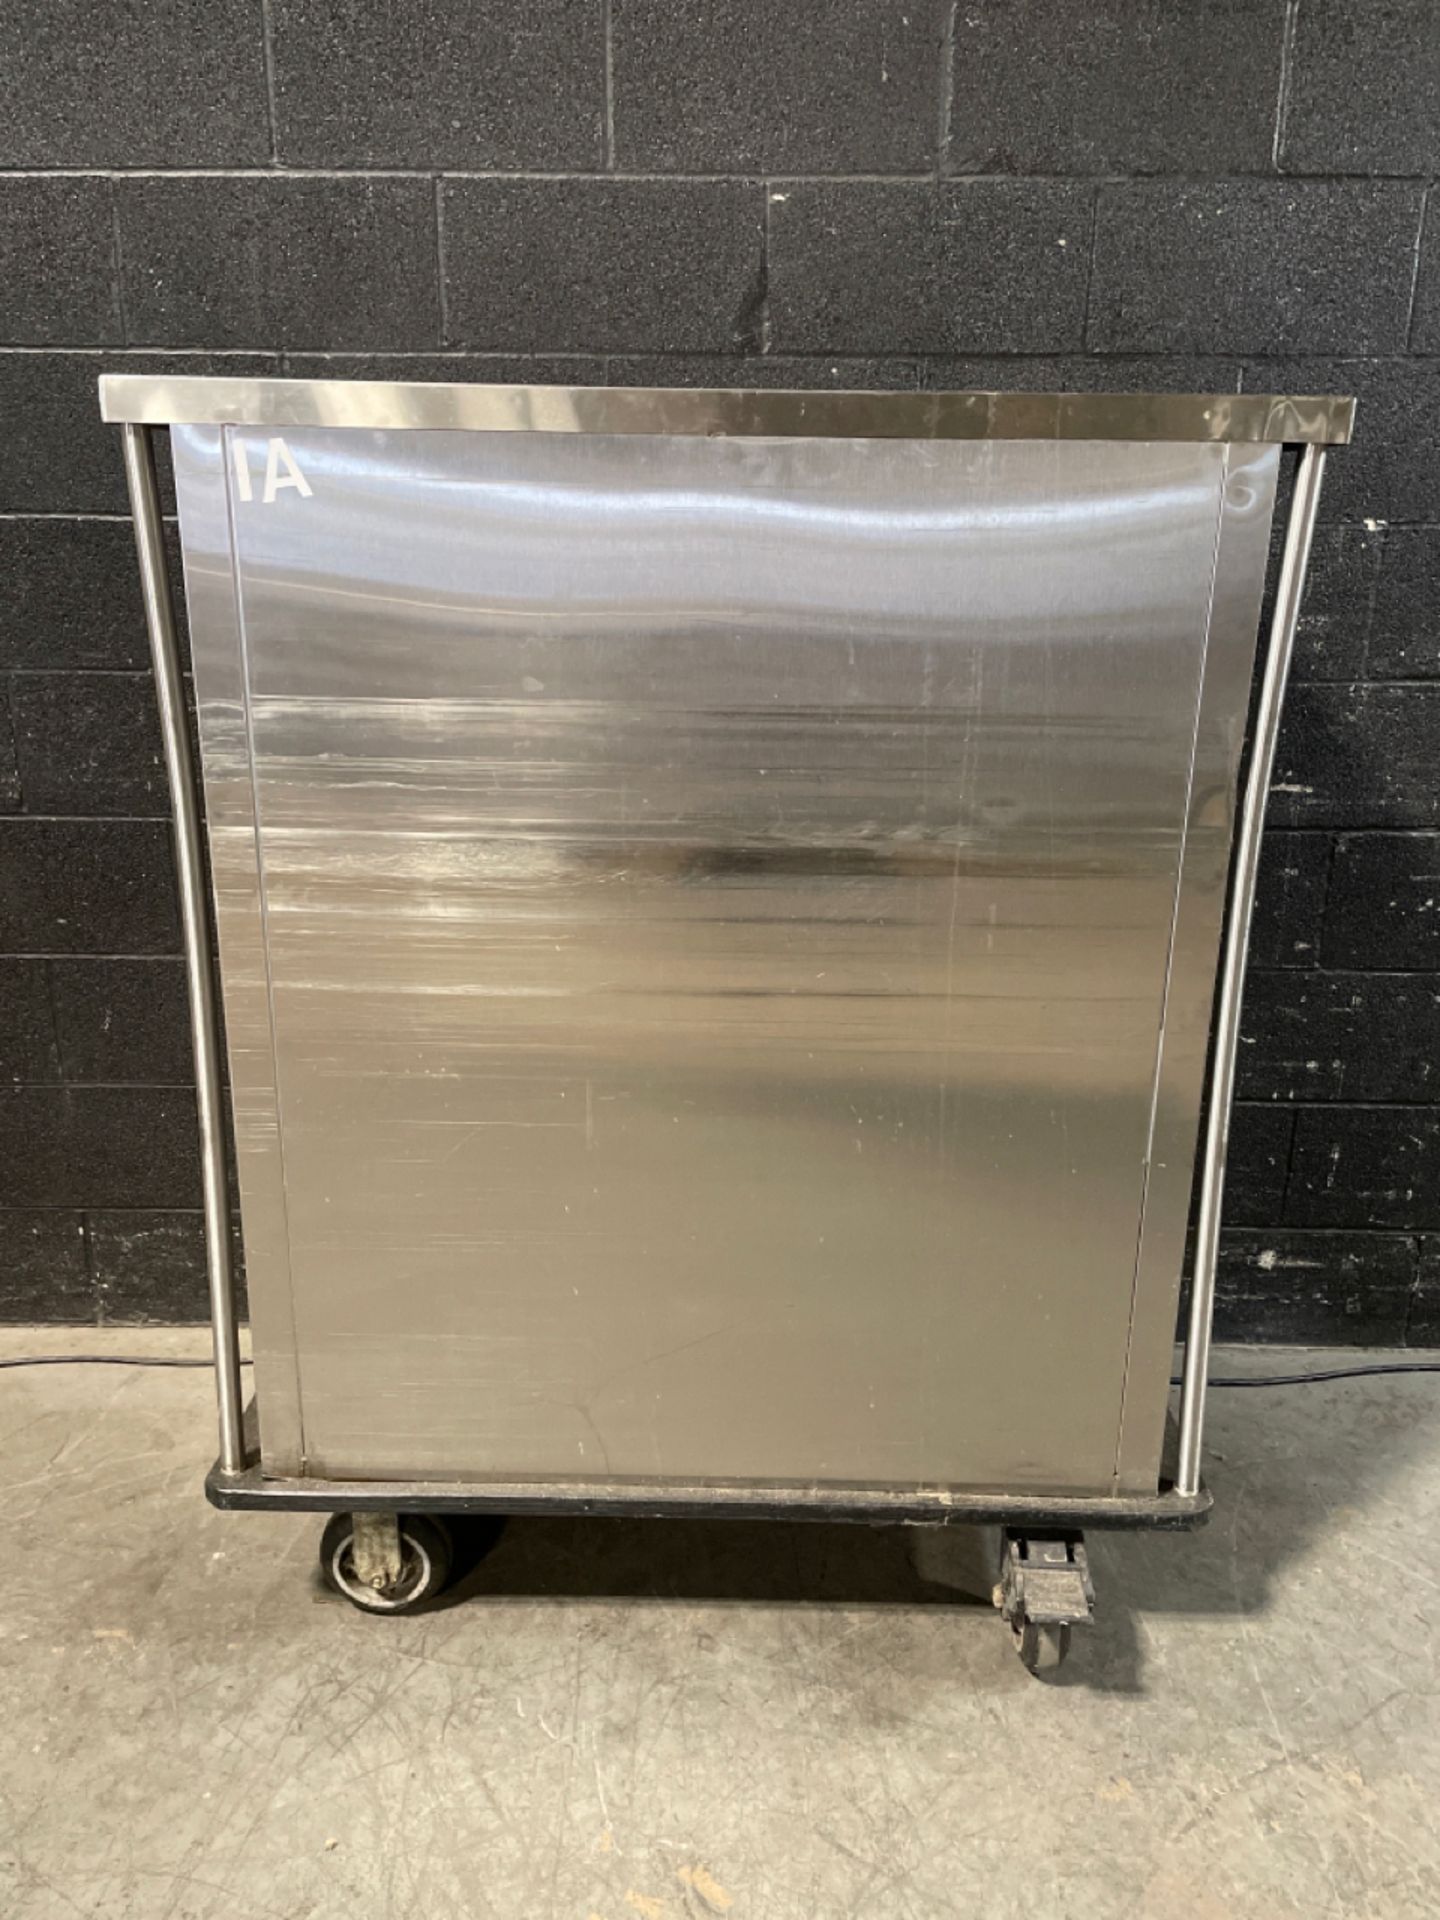 DINEX CARLISLE SS FOOD TRAY CART (LOCATED AT 151 REGAL ROW STE 231 DALLAS TX, 75247) - Image 6 of 6